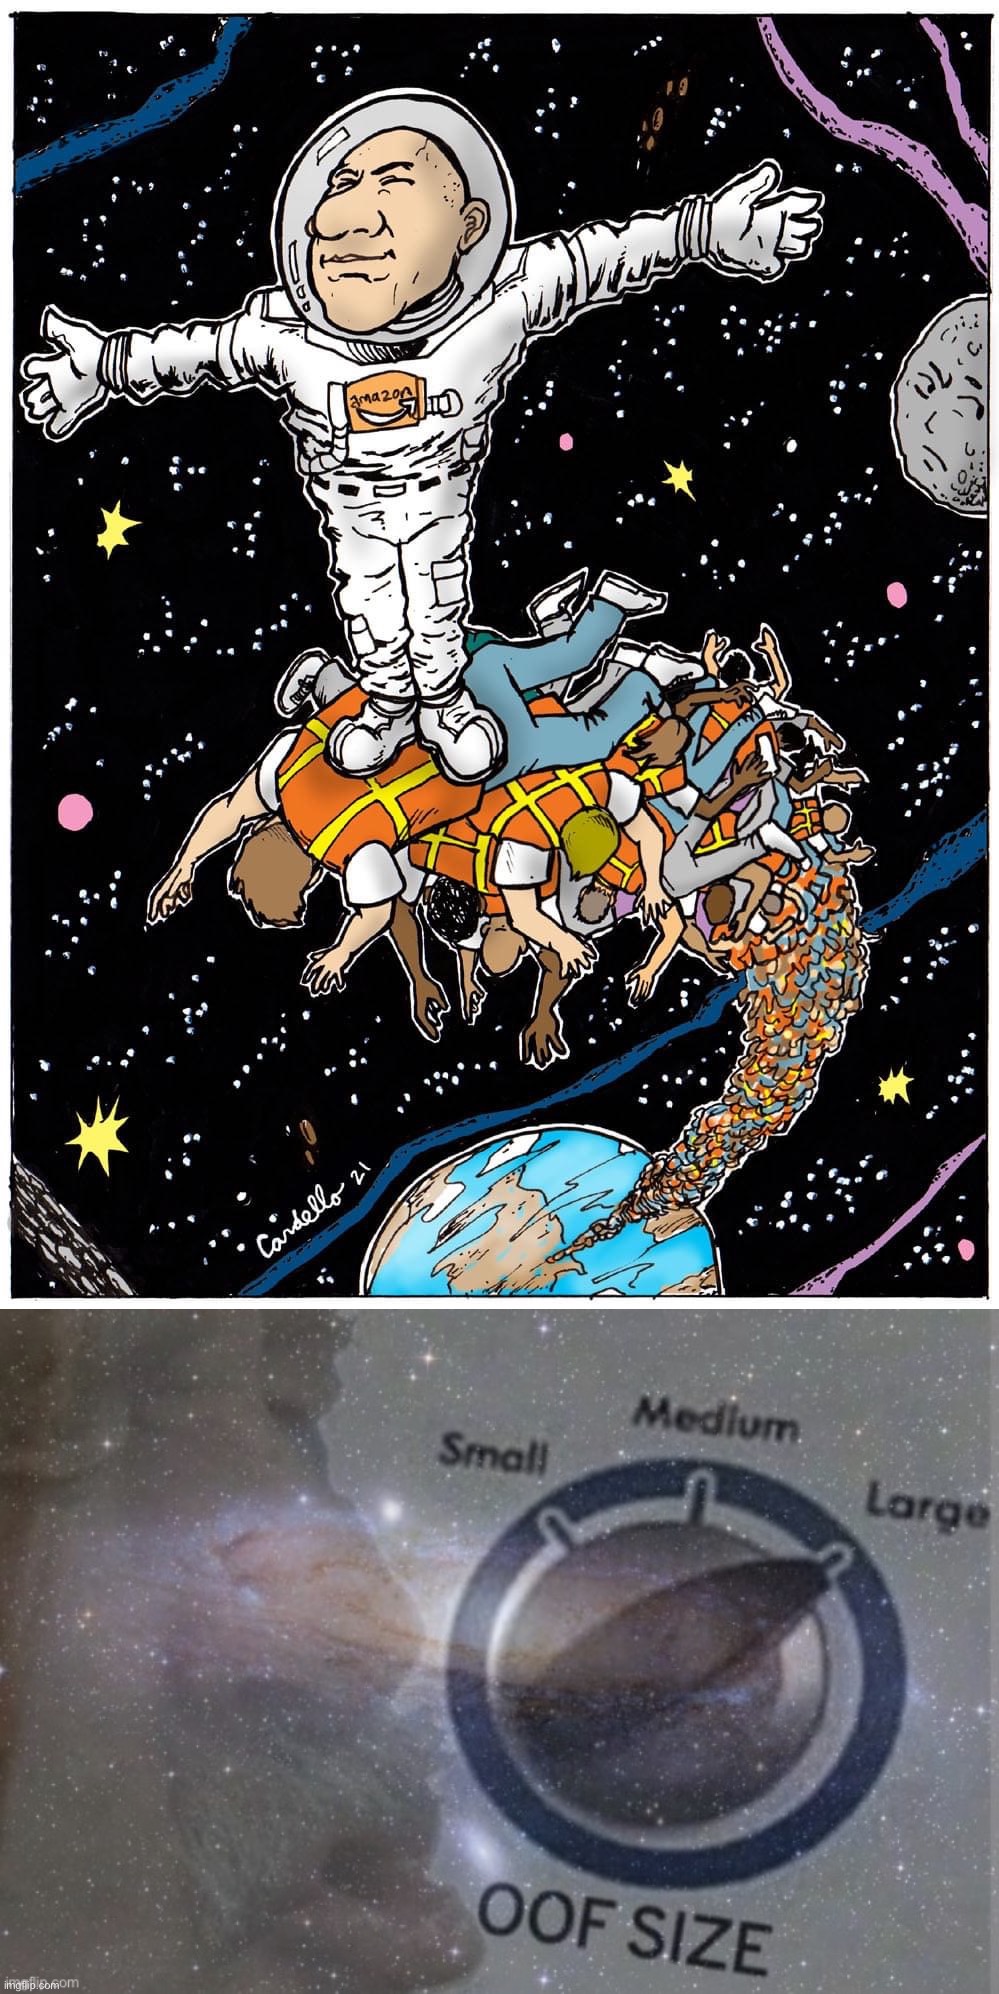 Oof Size Galaxy, Jeff | image tagged in jeff bezos in space,oof size galaxy,oof size large,jeff bezos,amazon,space | made w/ Imgflip meme maker